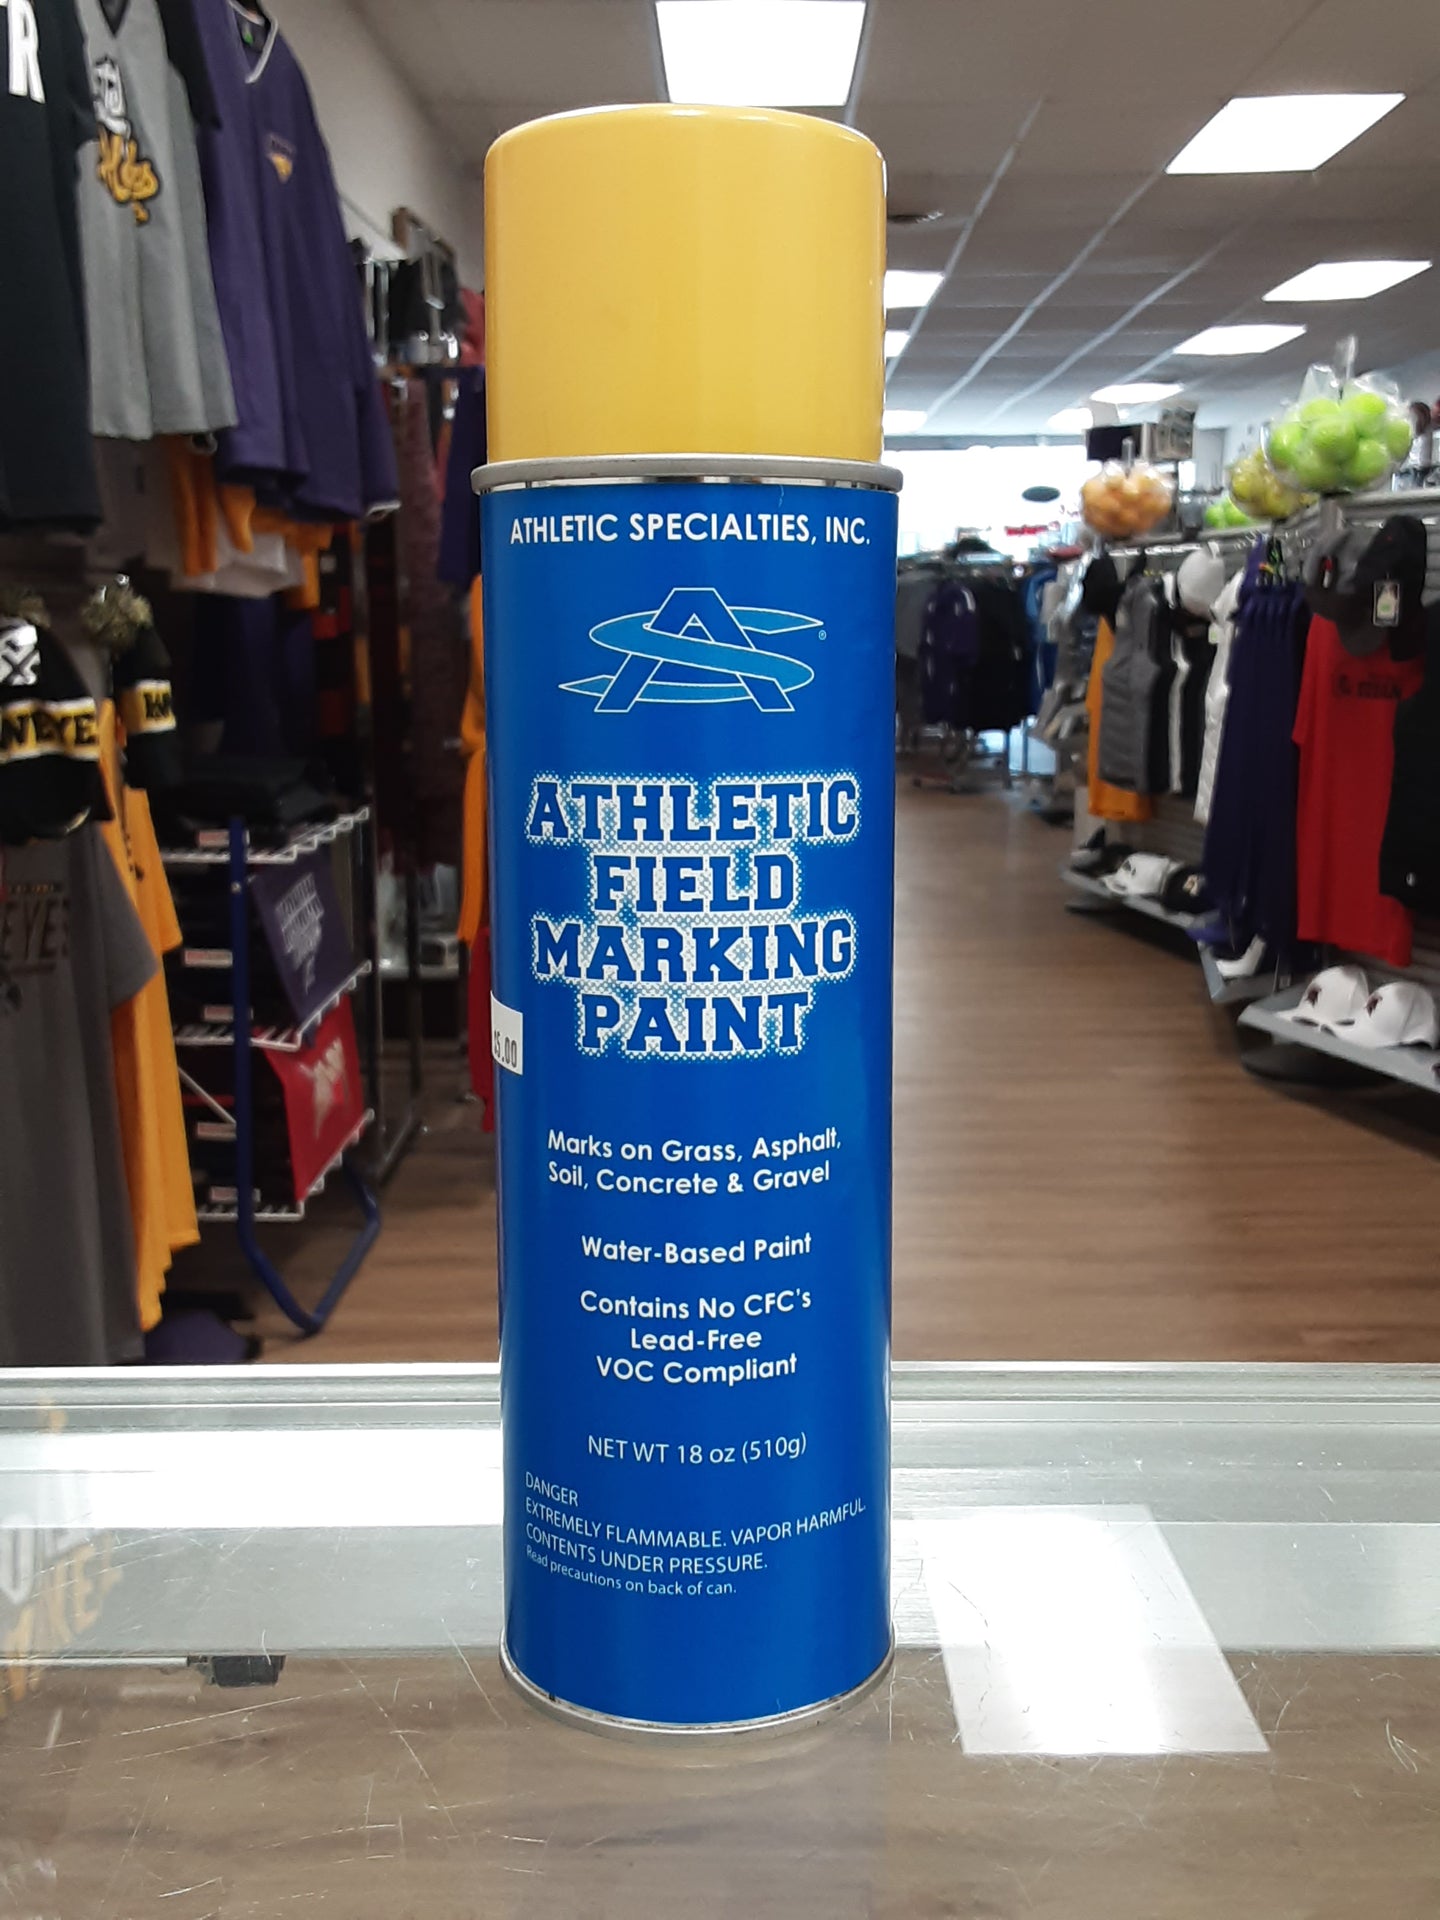 Athletic Specialties, INC. Athletic Field Marking Paint